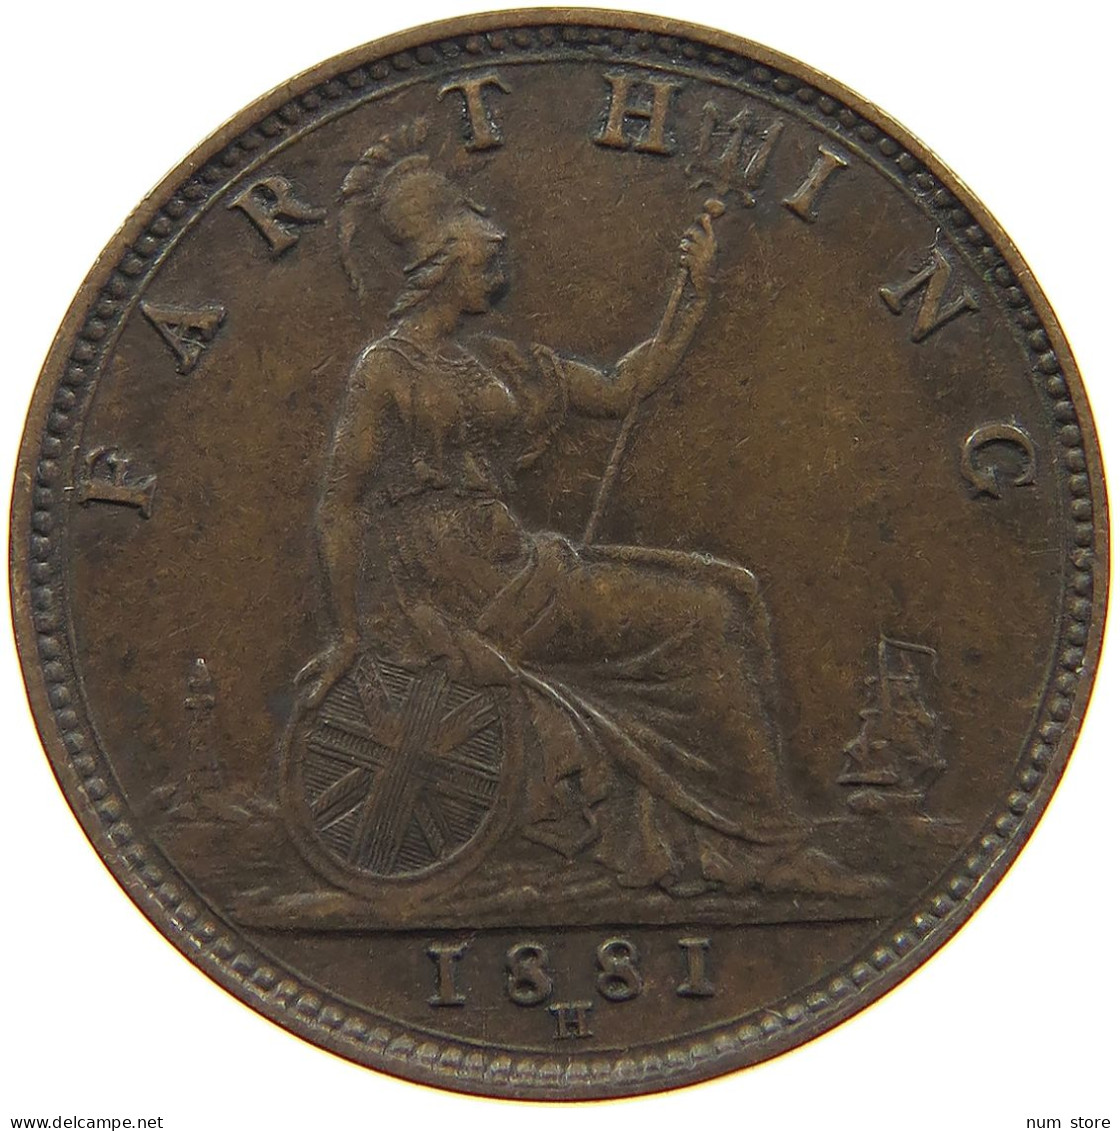 GREAT BRITAIN FARTHING 1881 H Victoria 1837-1901 #a011 0819 - B. 1 Farthing